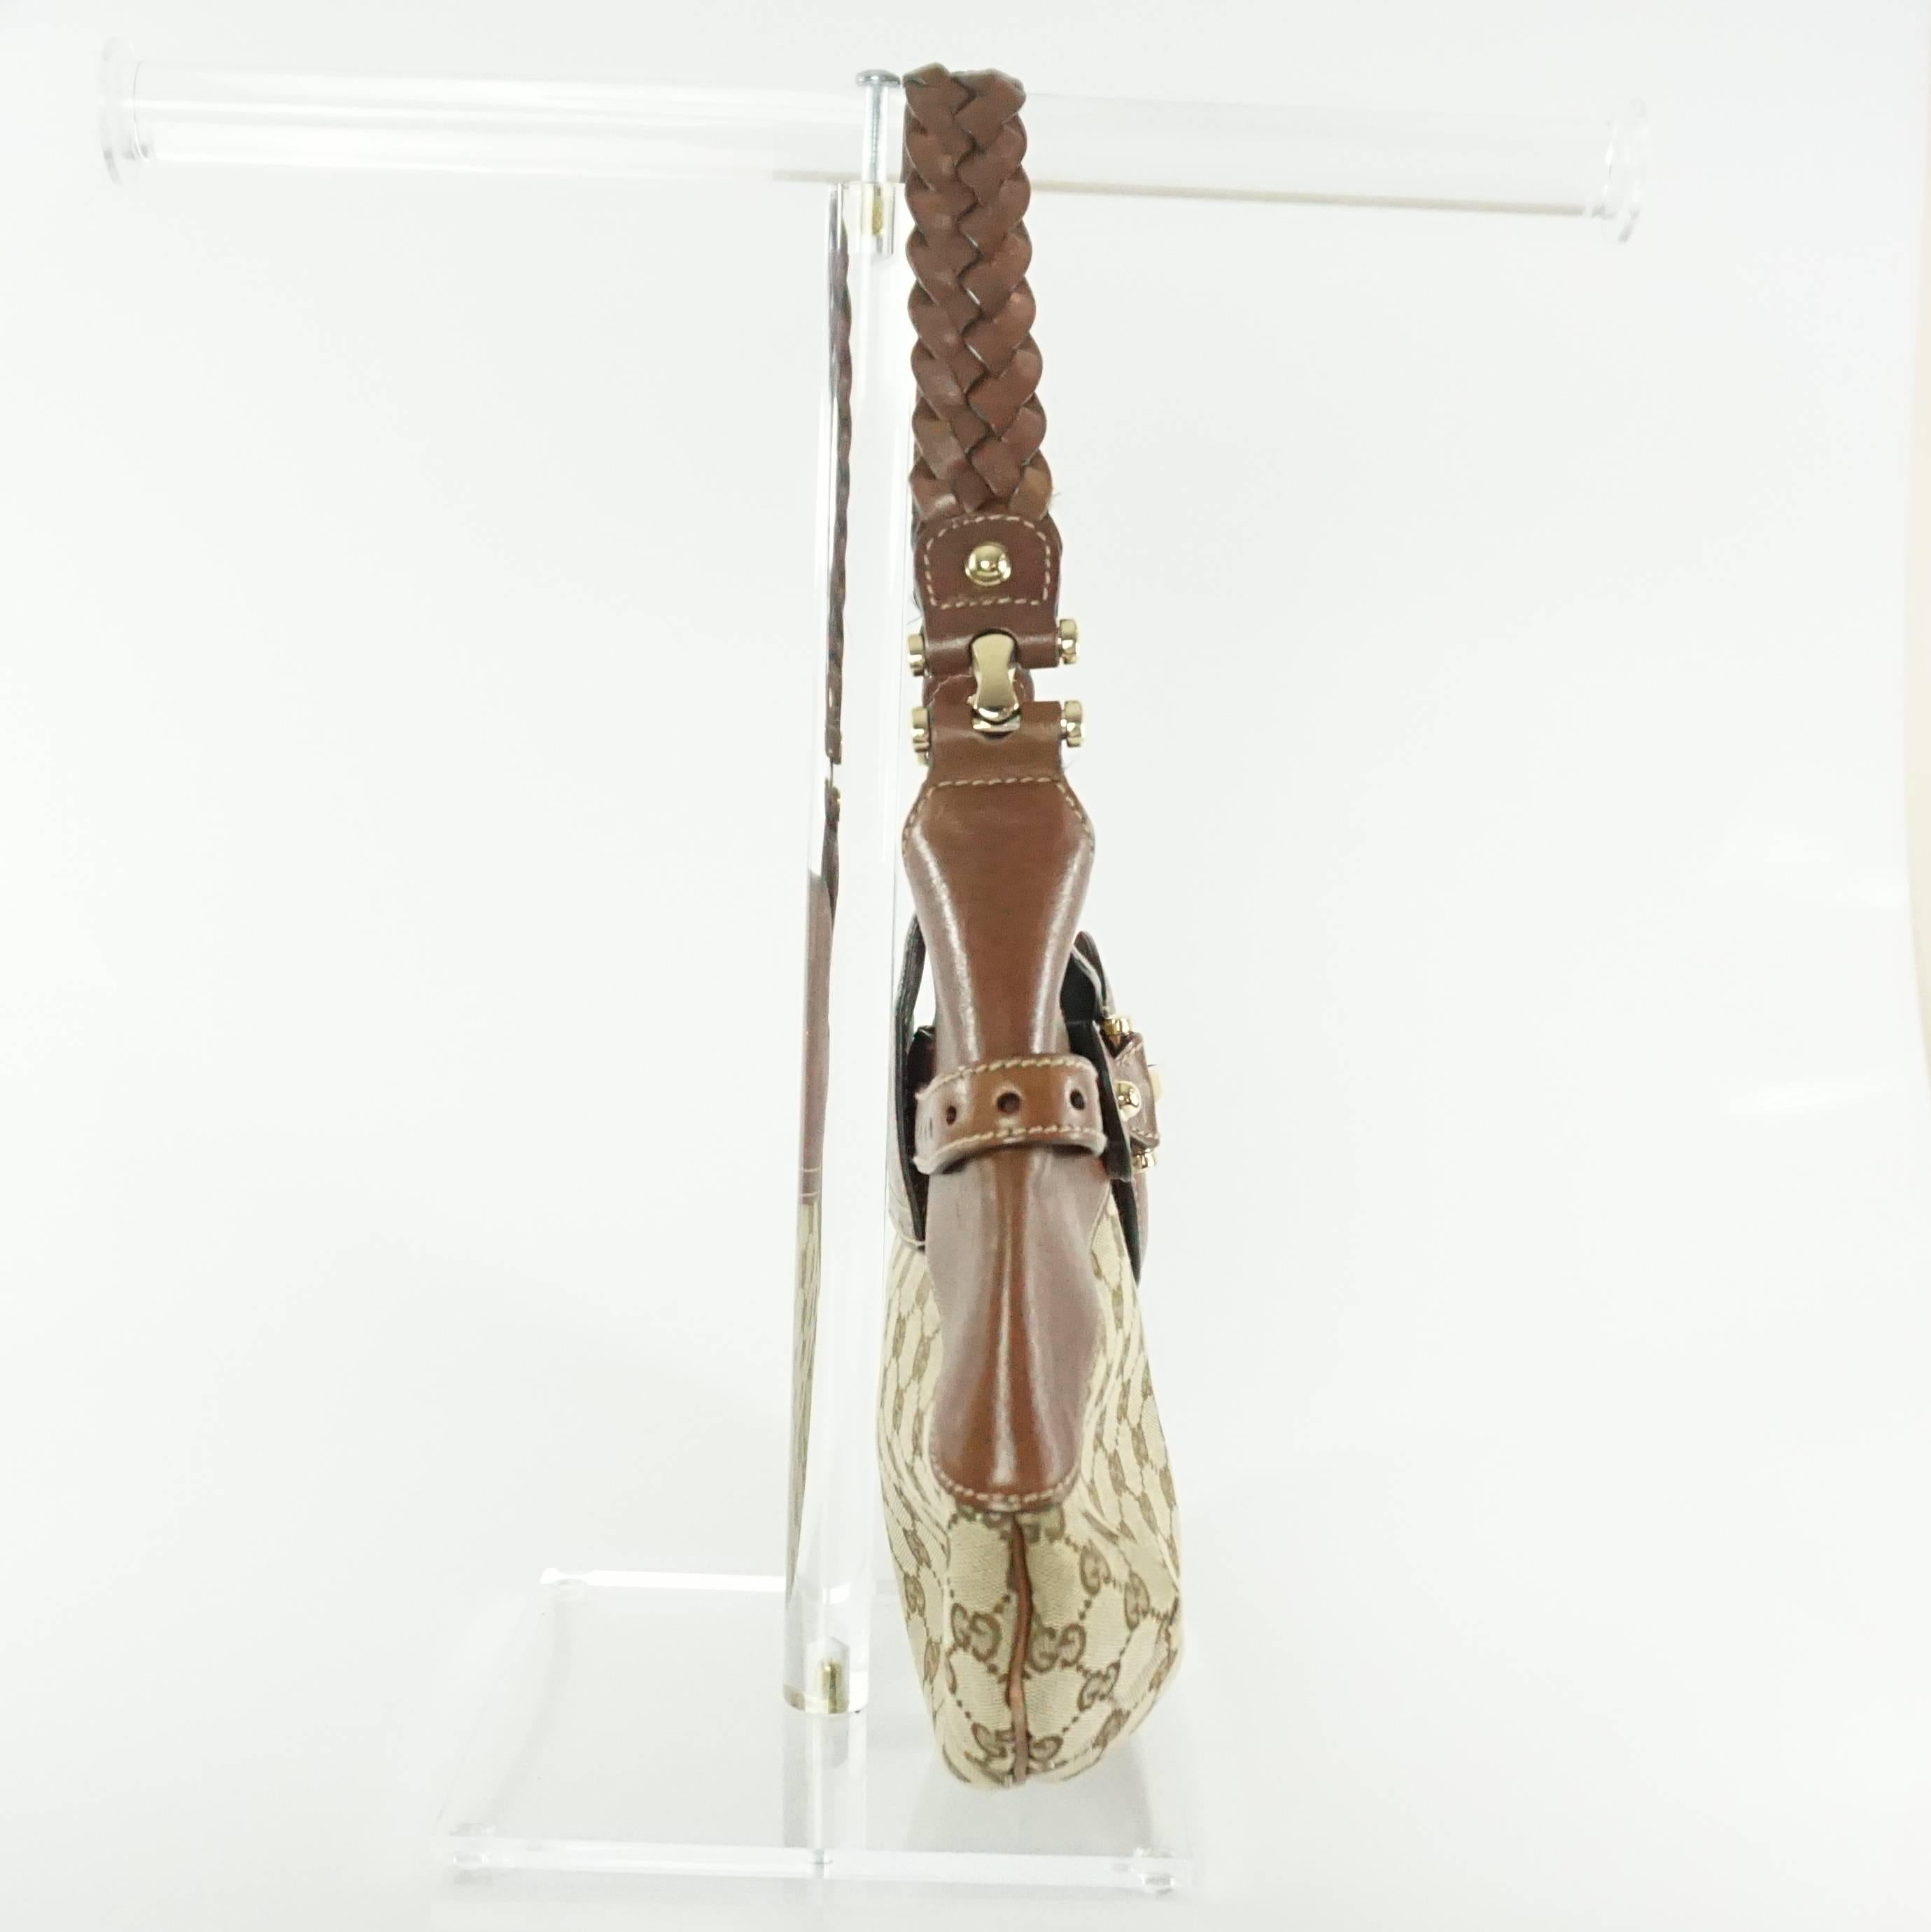 This Gucci Gg horsebit shoulder bag is made of a monogram canvas fabric with brown leather. The shoulder bag has a large horsebit detail in the front with a braided strap. The bag has a small flap and one small zipper compartment. The bag is in good